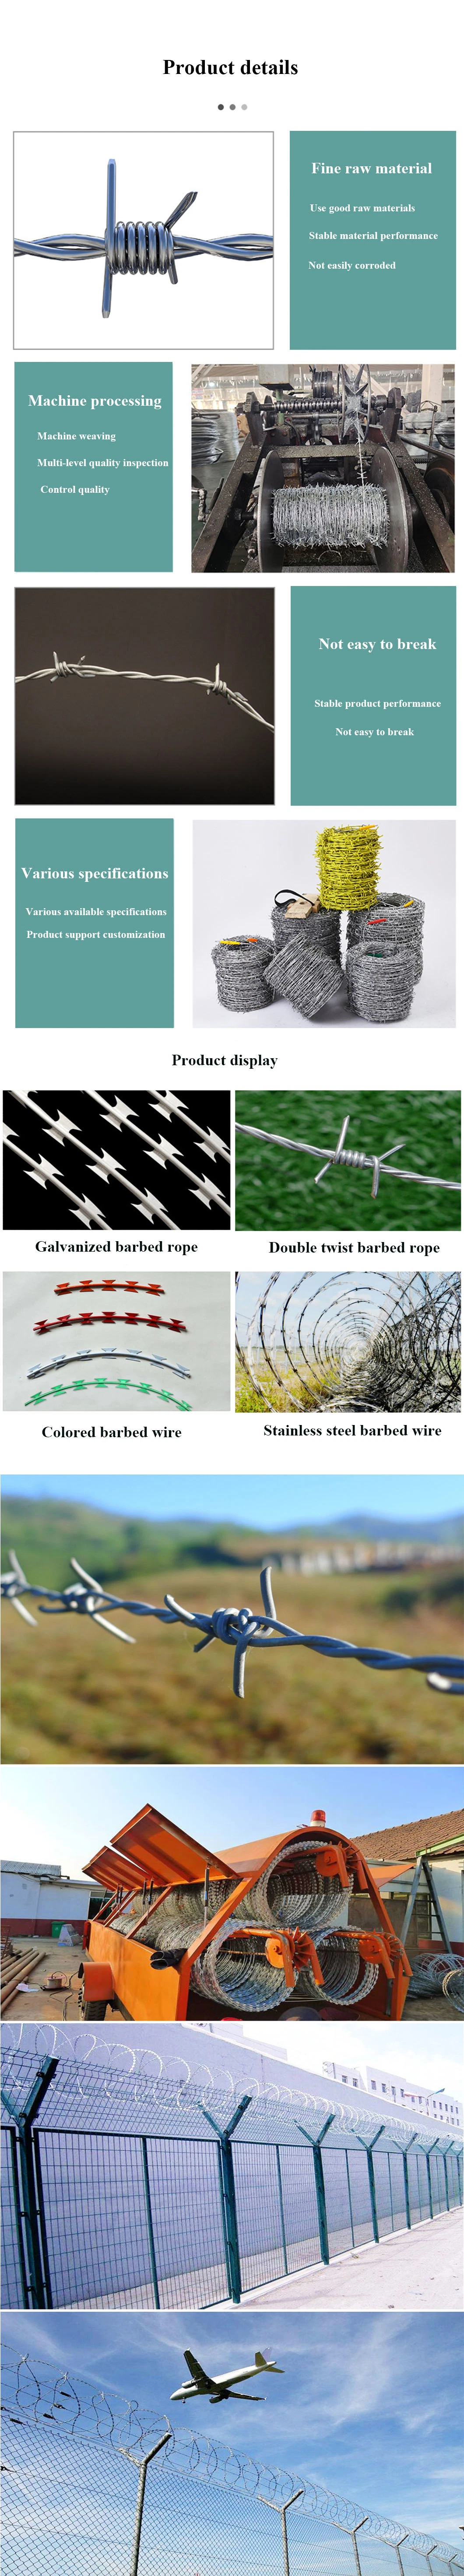 Stainless Steel Barbed Wire Hot-DIP Galvanized Barbed Wire Anti-Climbing Barbed Wire Thorny Rope